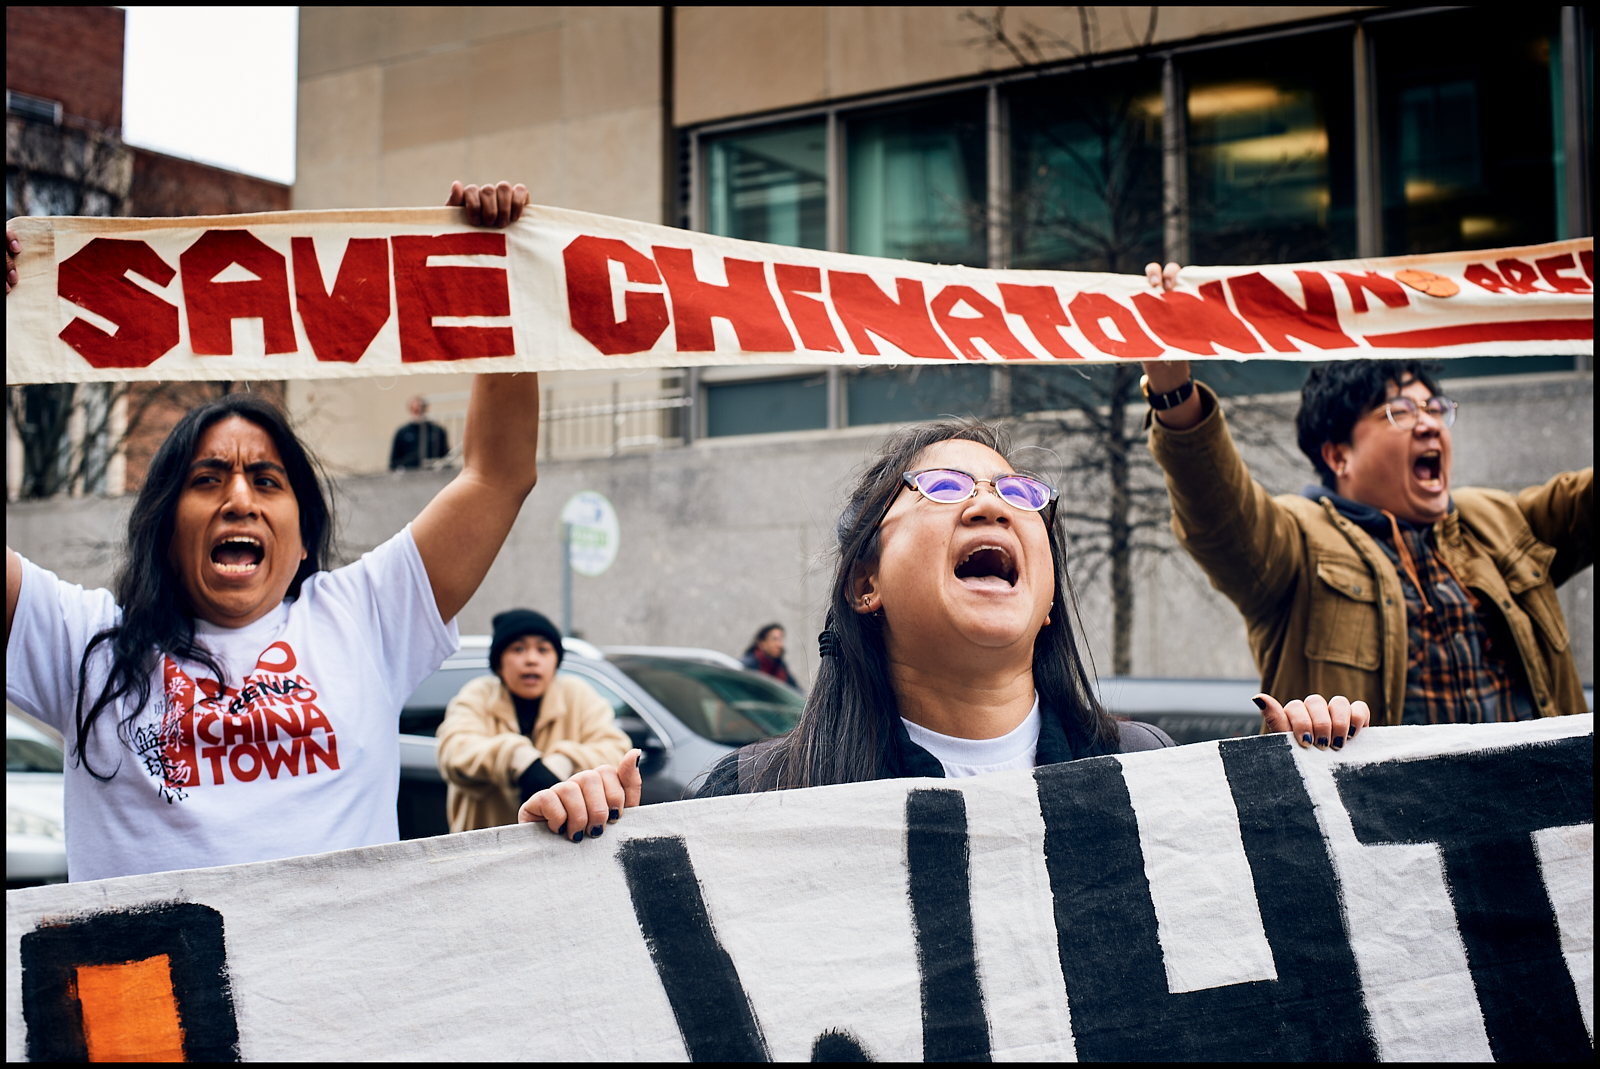 Members of Students for the Preservation of Chinatown protest